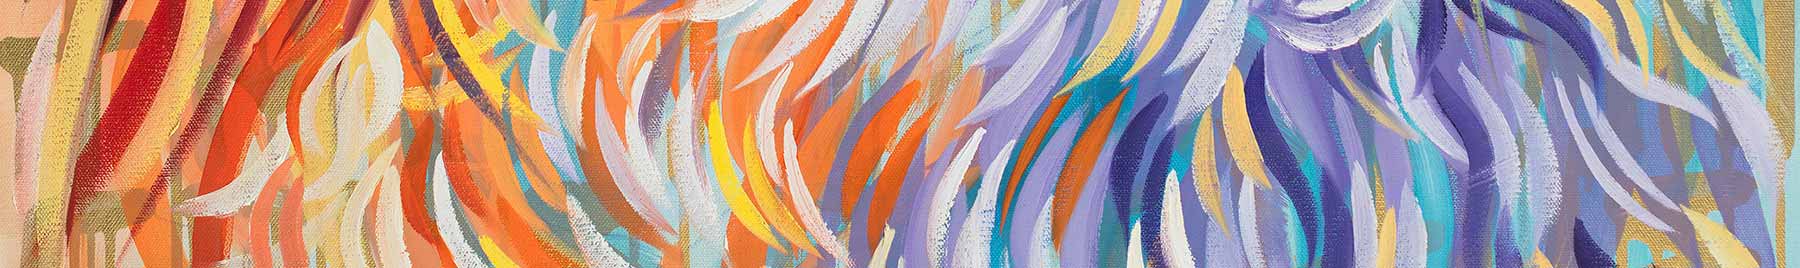 abstract brush strokes in orange and purple